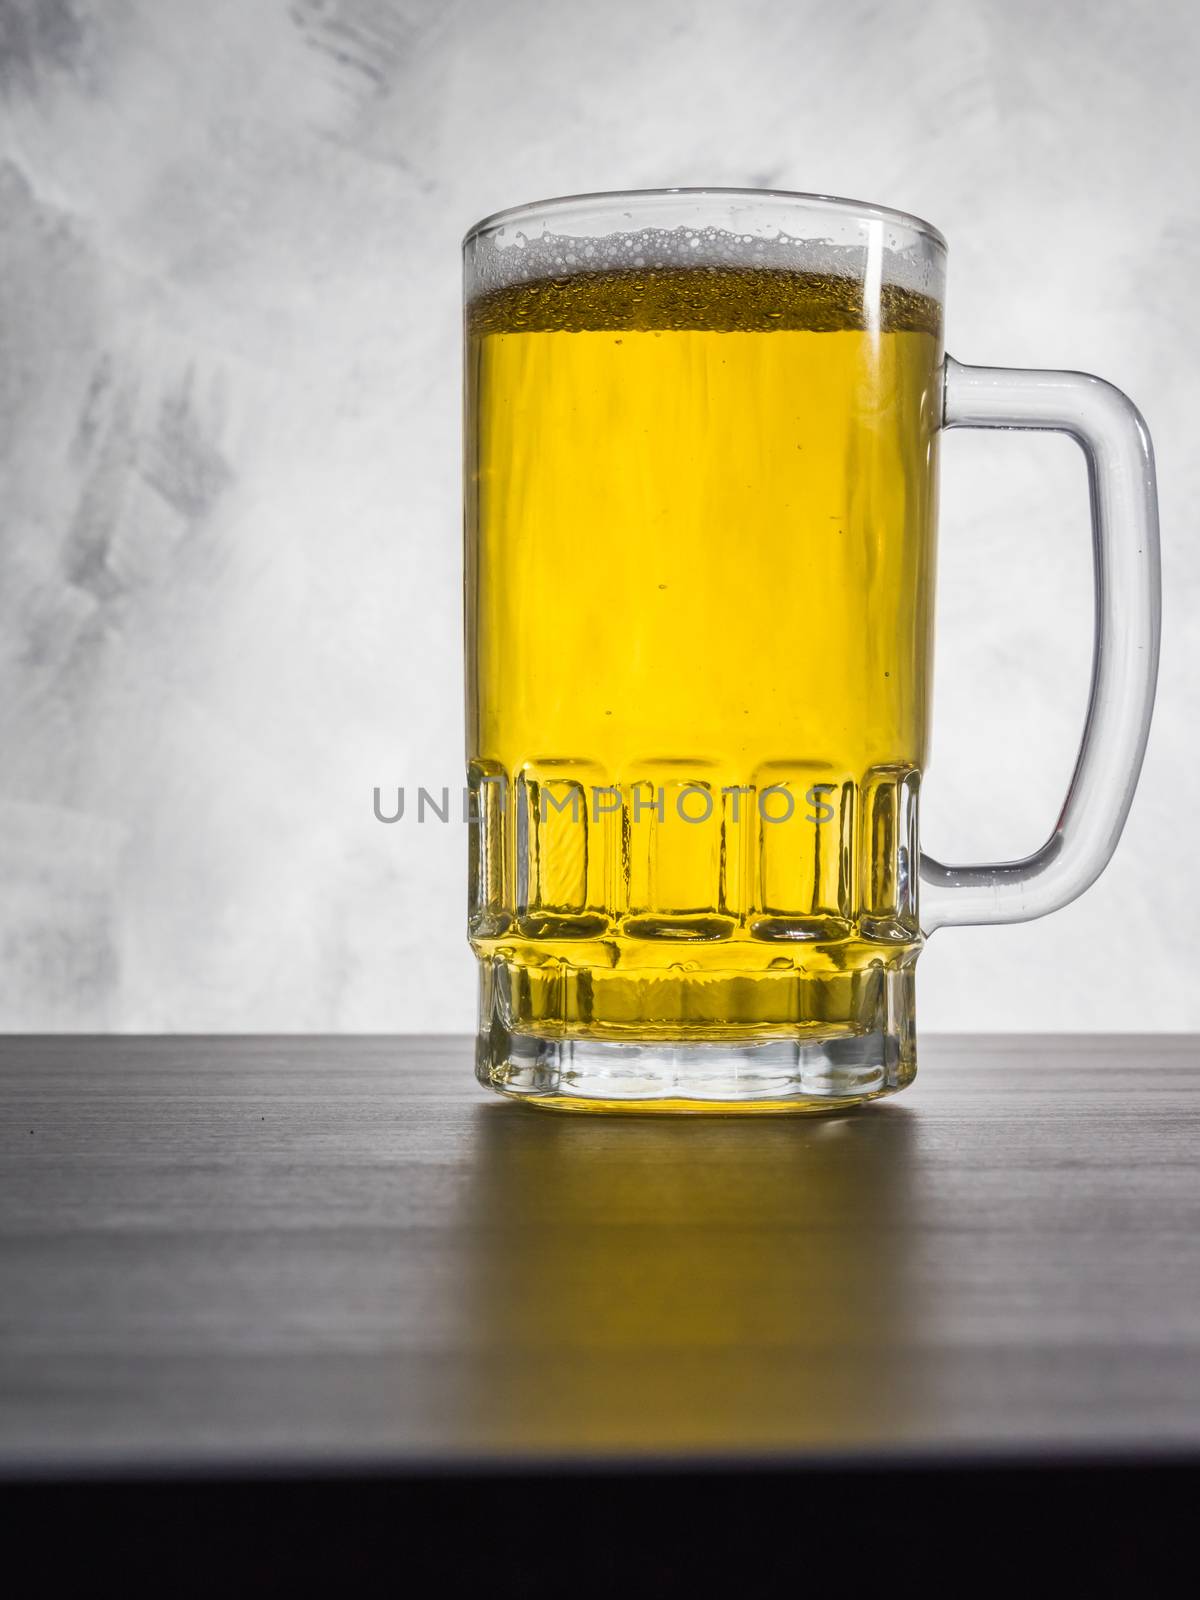 Glass of beer on a grunge background. by ronnarong